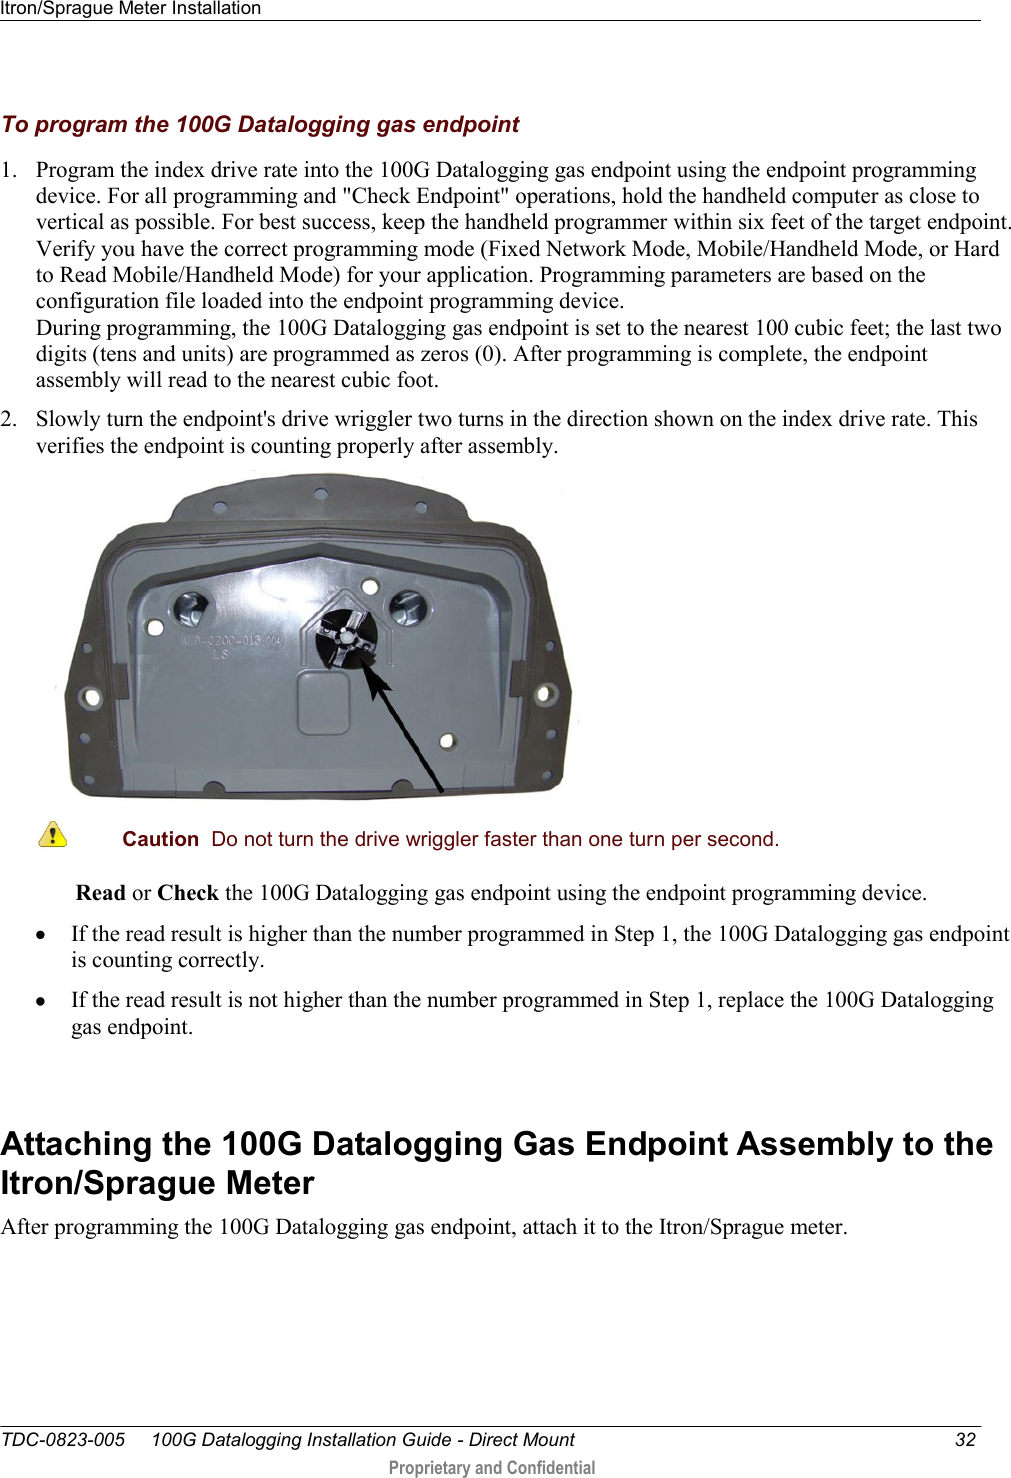 Itron/Sprague Meter Installation   TDC-0823-005     100G Datalogging Installation Guide - Direct Mount  32  Proprietary and Confidential     To program the 100G Datalogging gas endpoint 1. Program the index drive rate into the 100G Datalogging gas endpoint using the endpoint programming device. For all programming and &quot;Check Endpoint&quot; operations, hold the handheld computer as close to vertical as possible. For best success, keep the handheld programmer within six feet of the target endpoint. Verify you have the correct programming mode (Fixed Network Mode, Mobile/Handheld Mode, or Hard to Read Mobile/Handheld Mode) for your application. Programming parameters are based on the configuration file loaded into the endpoint programming device.  During programming, the 100G Datalogging gas endpoint is set to the nearest 100 cubic feet; the last two digits (tens and units) are programmed as zeros (0). After programming is complete, the endpoint assembly will read to the nearest cubic foot.  2. Slowly turn the endpoint&apos;s drive wriggler two turns in the direction shown on the index drive rate. This verifies the endpoint is counting properly after assembly.   Caution  Do not turn the drive wriggler faster than one turn per second.  Read or Check the 100G Datalogging gas endpoint using the endpoint programming device.   If the read result is higher than the number programmed in Step 1, the 100G Datalogging gas endpoint is counting correctly.   If the read result is not higher than the number programmed in Step 1, replace the 100G Datalogging gas endpoint.   Attaching the 100G Datalogging Gas Endpoint Assembly to the Itron/Sprague Meter After programming the 100G Datalogging gas endpoint, attach it to the Itron/Sprague meter.   